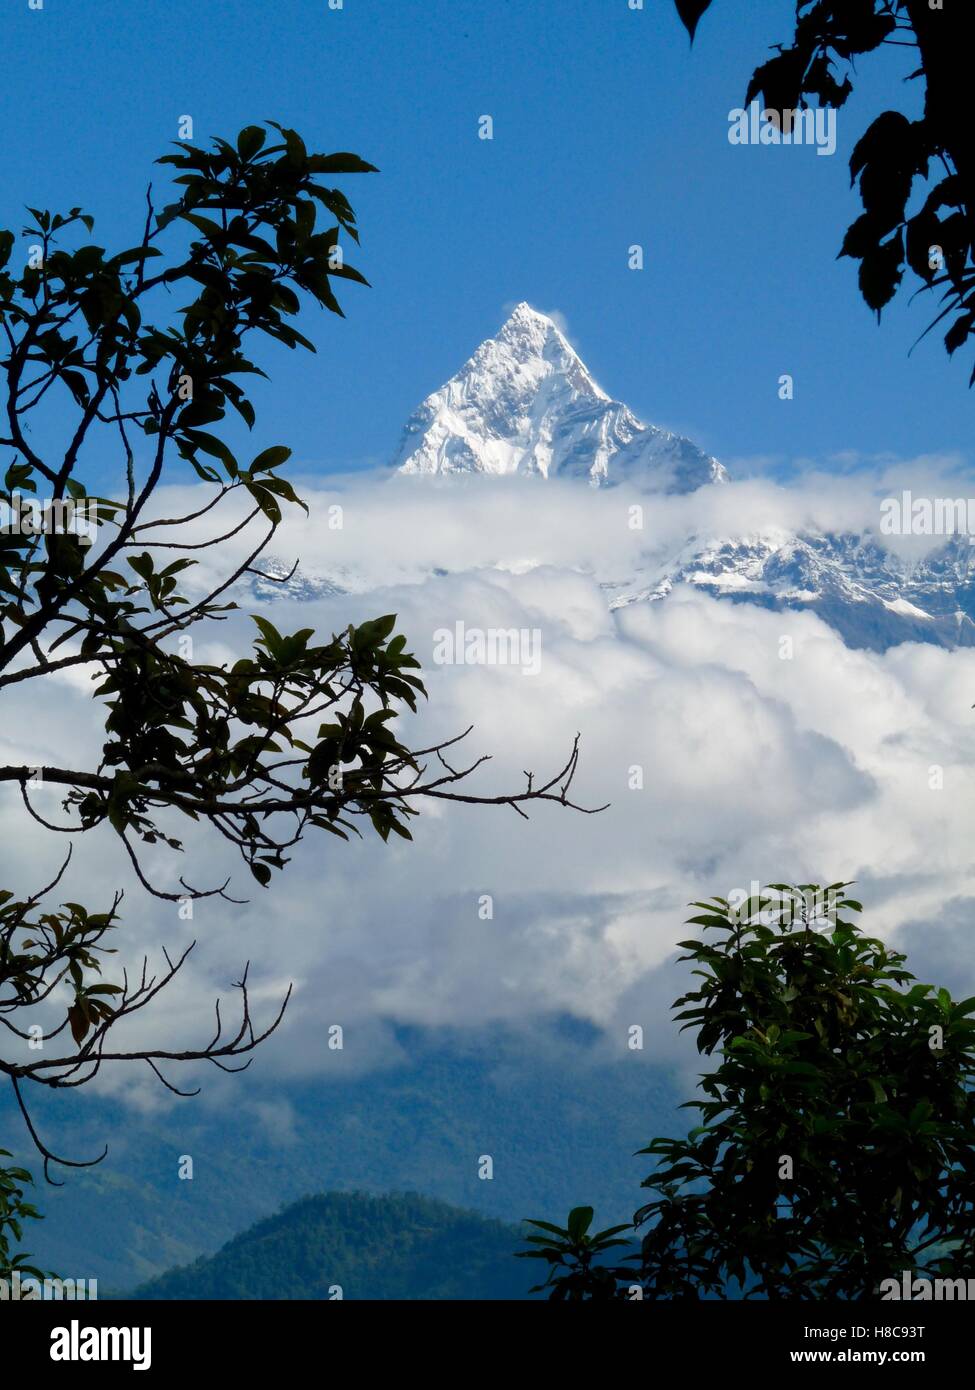 Portrait format view of snowy Fishtail mountain in Annapurna range, Himalayas, Nepal, against clear blue sky, framed by trees Stock Photo